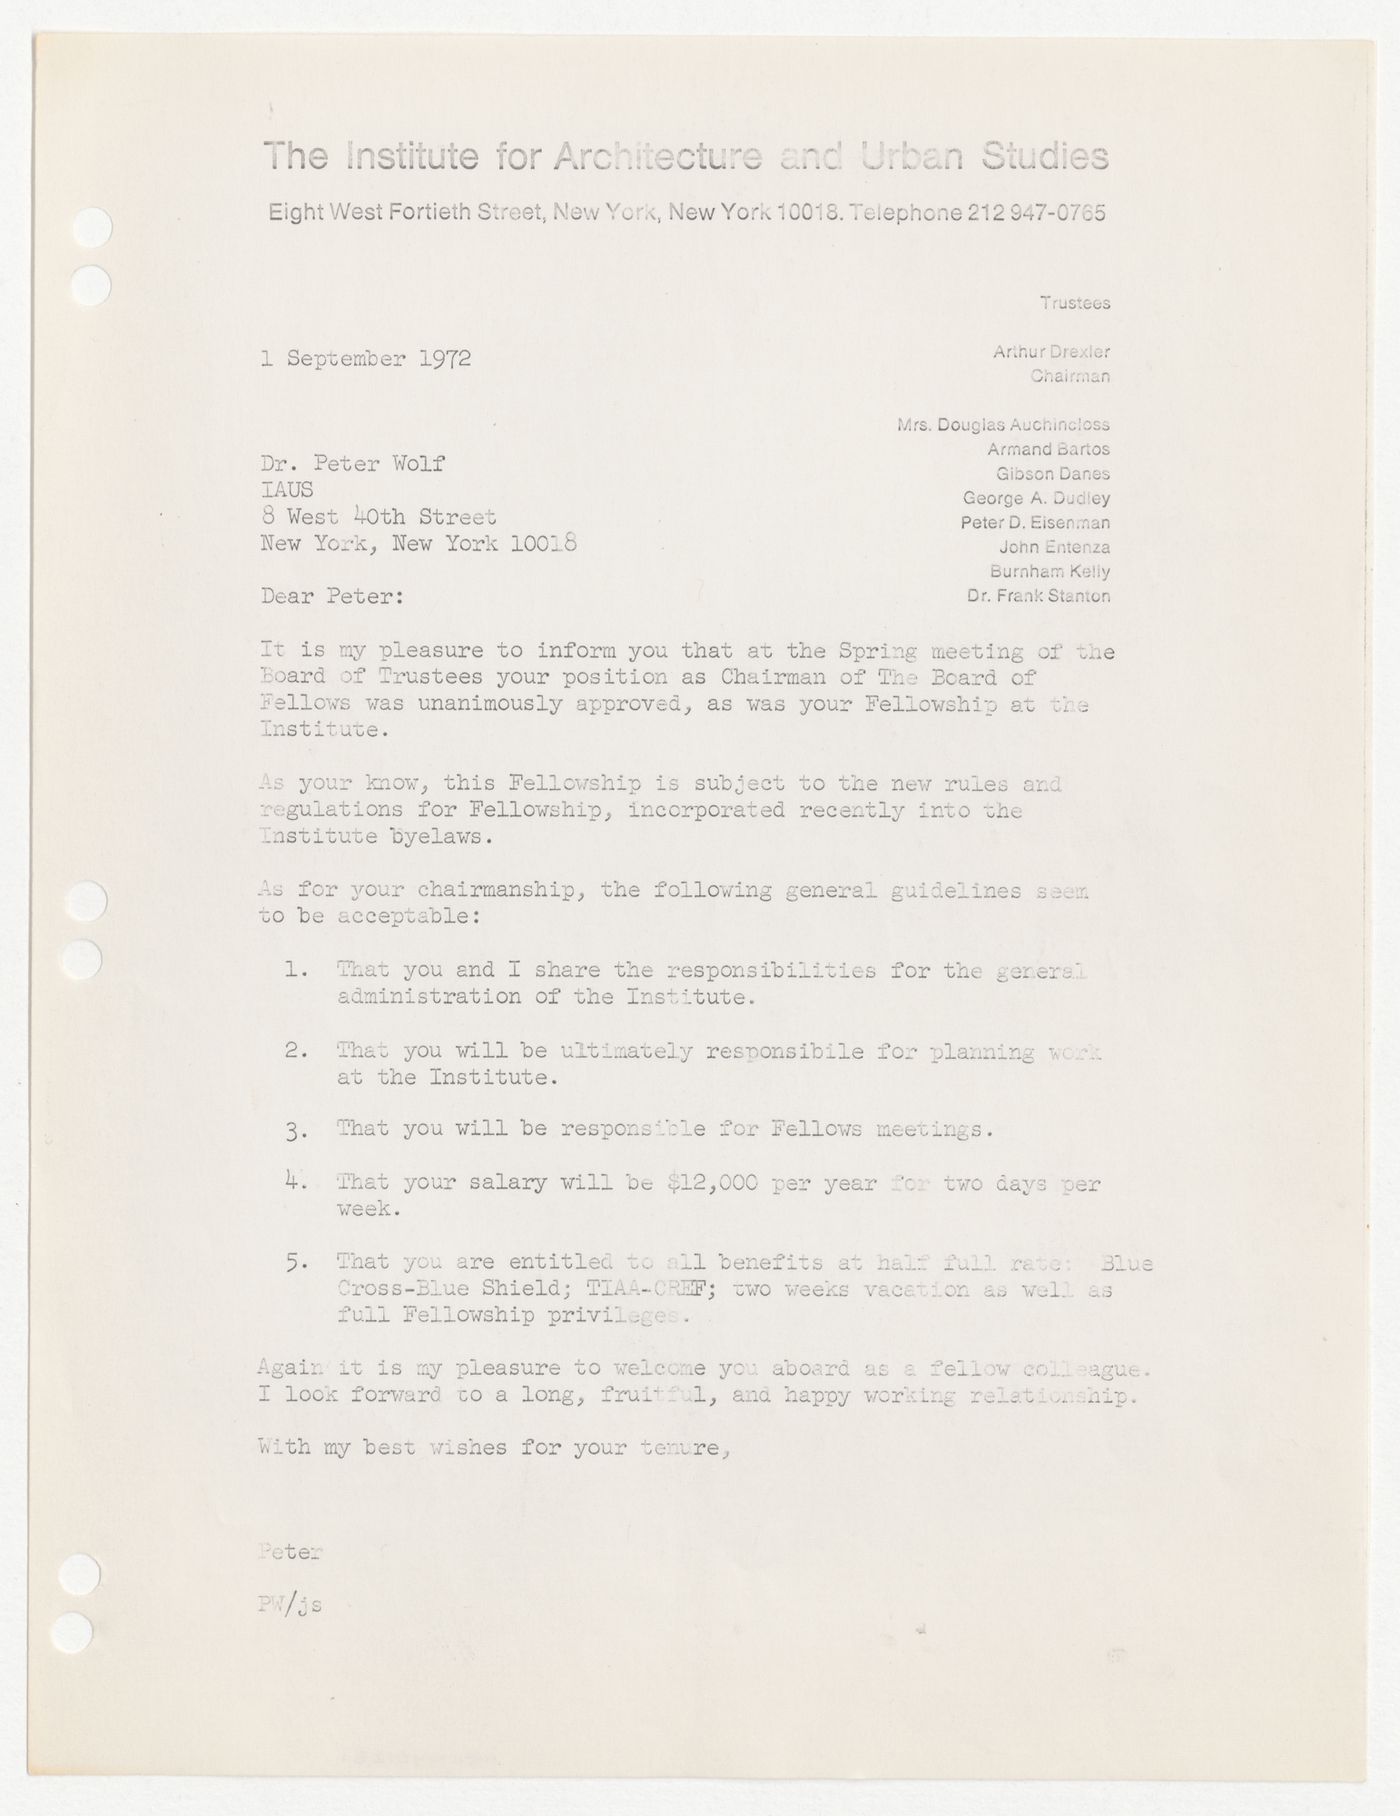 Letter from Peter D. Eisenman to Peter Wolf annoncing Wolf's nomination as Chairman of the Board of Fellows